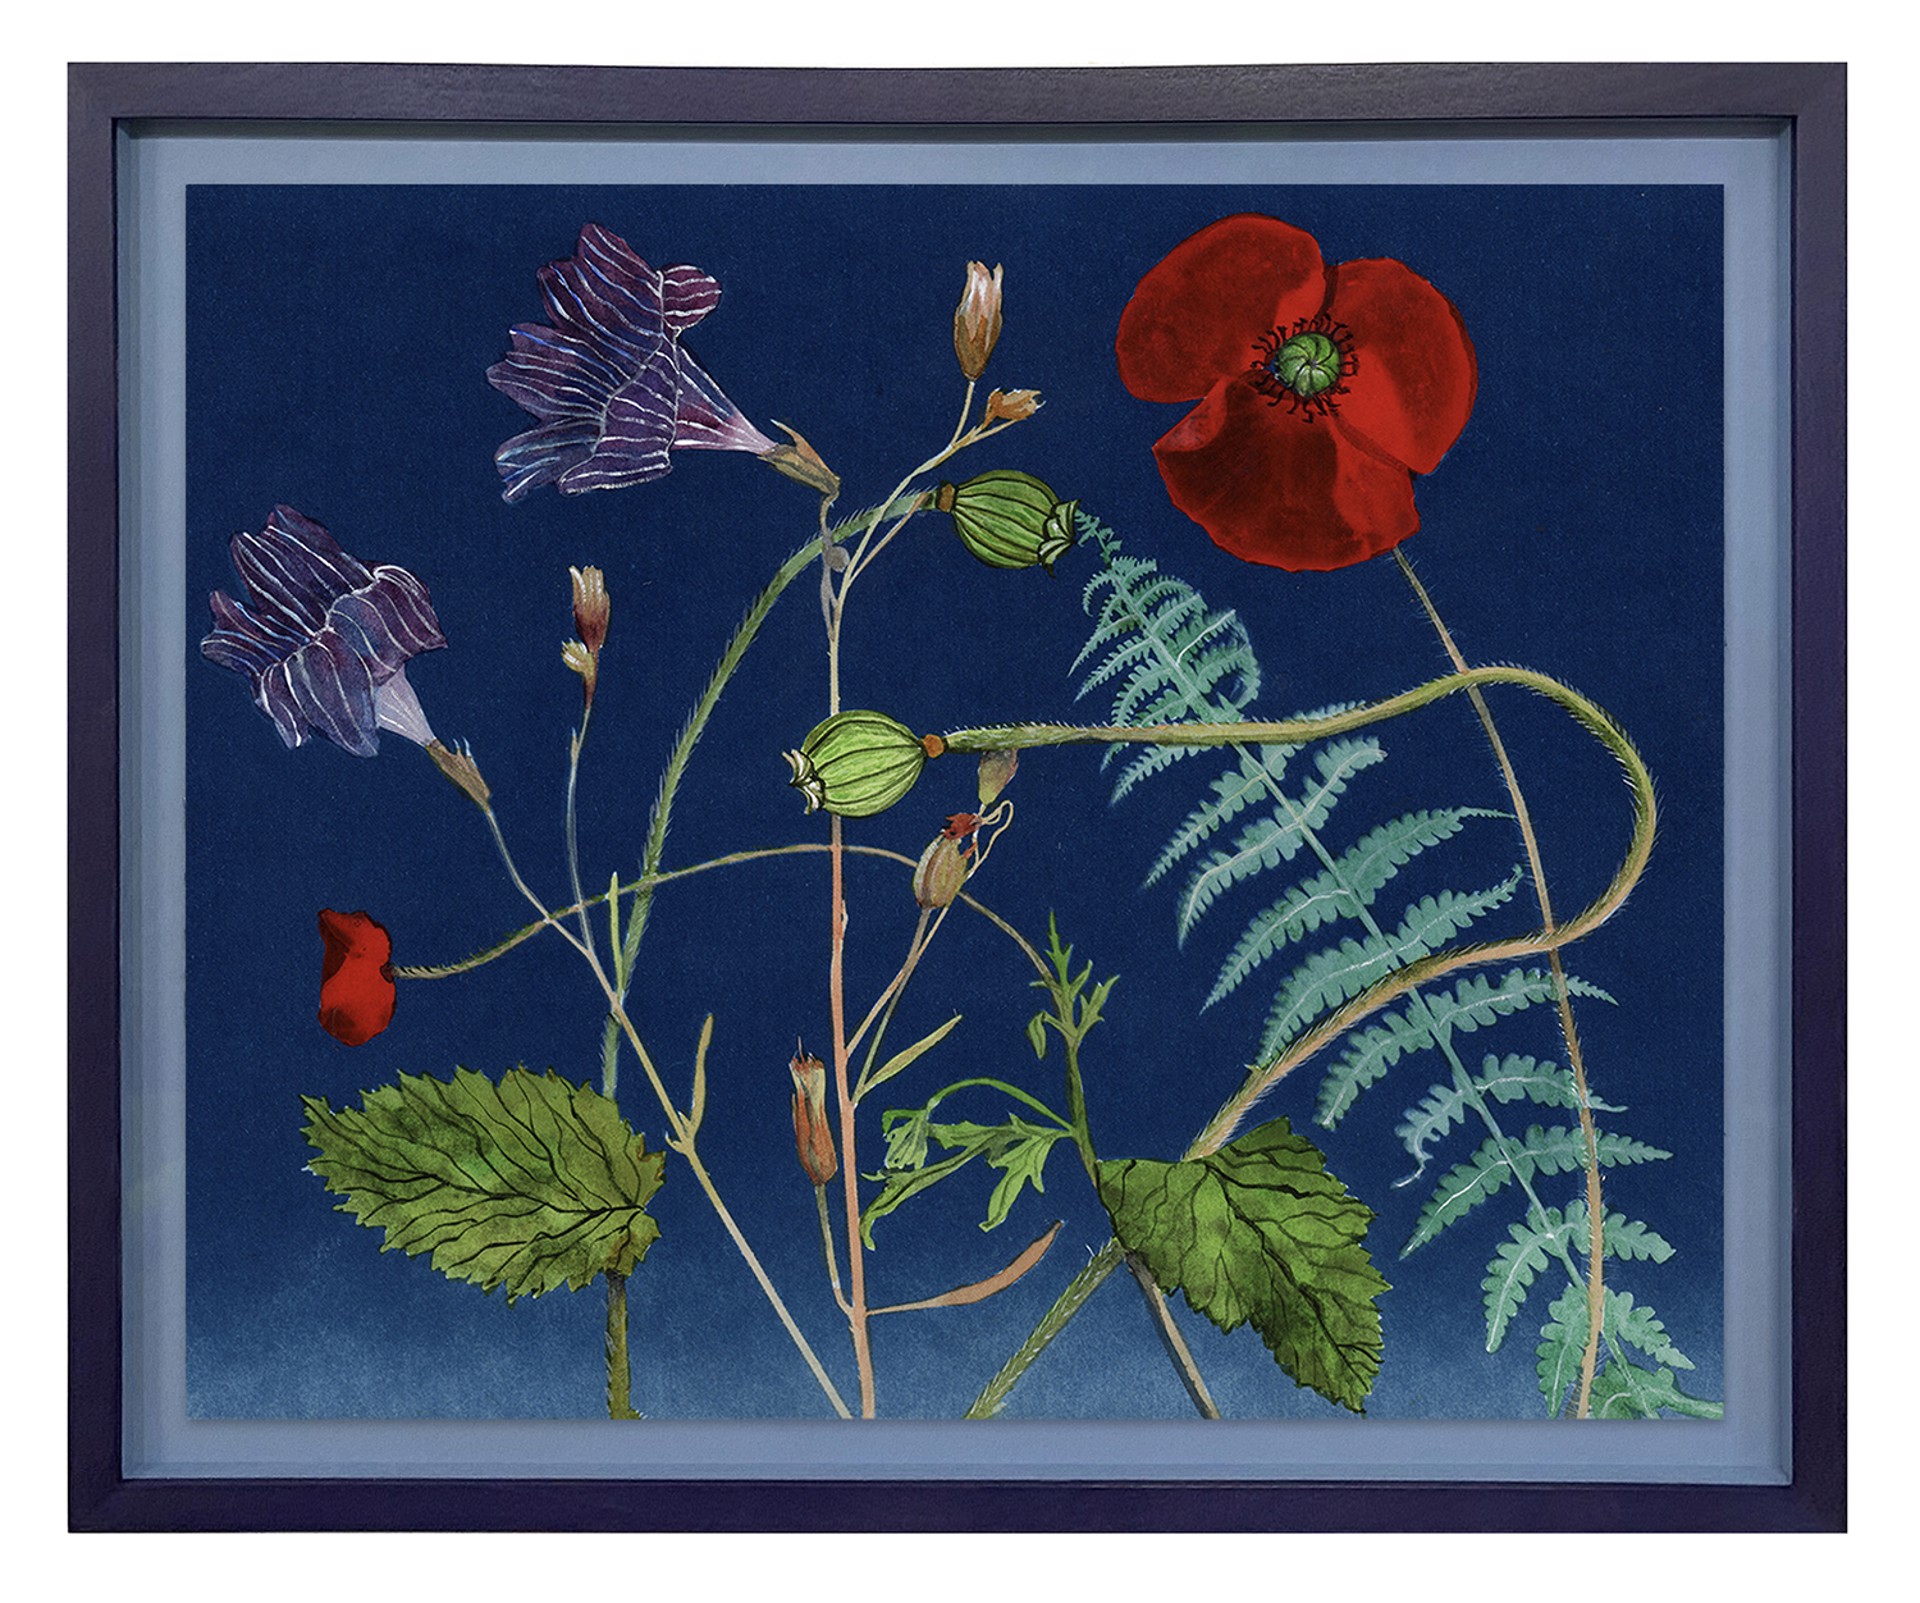 Nocturnal Nature (Poppies, Petunia, Fern) by Julia Whitney Barnes